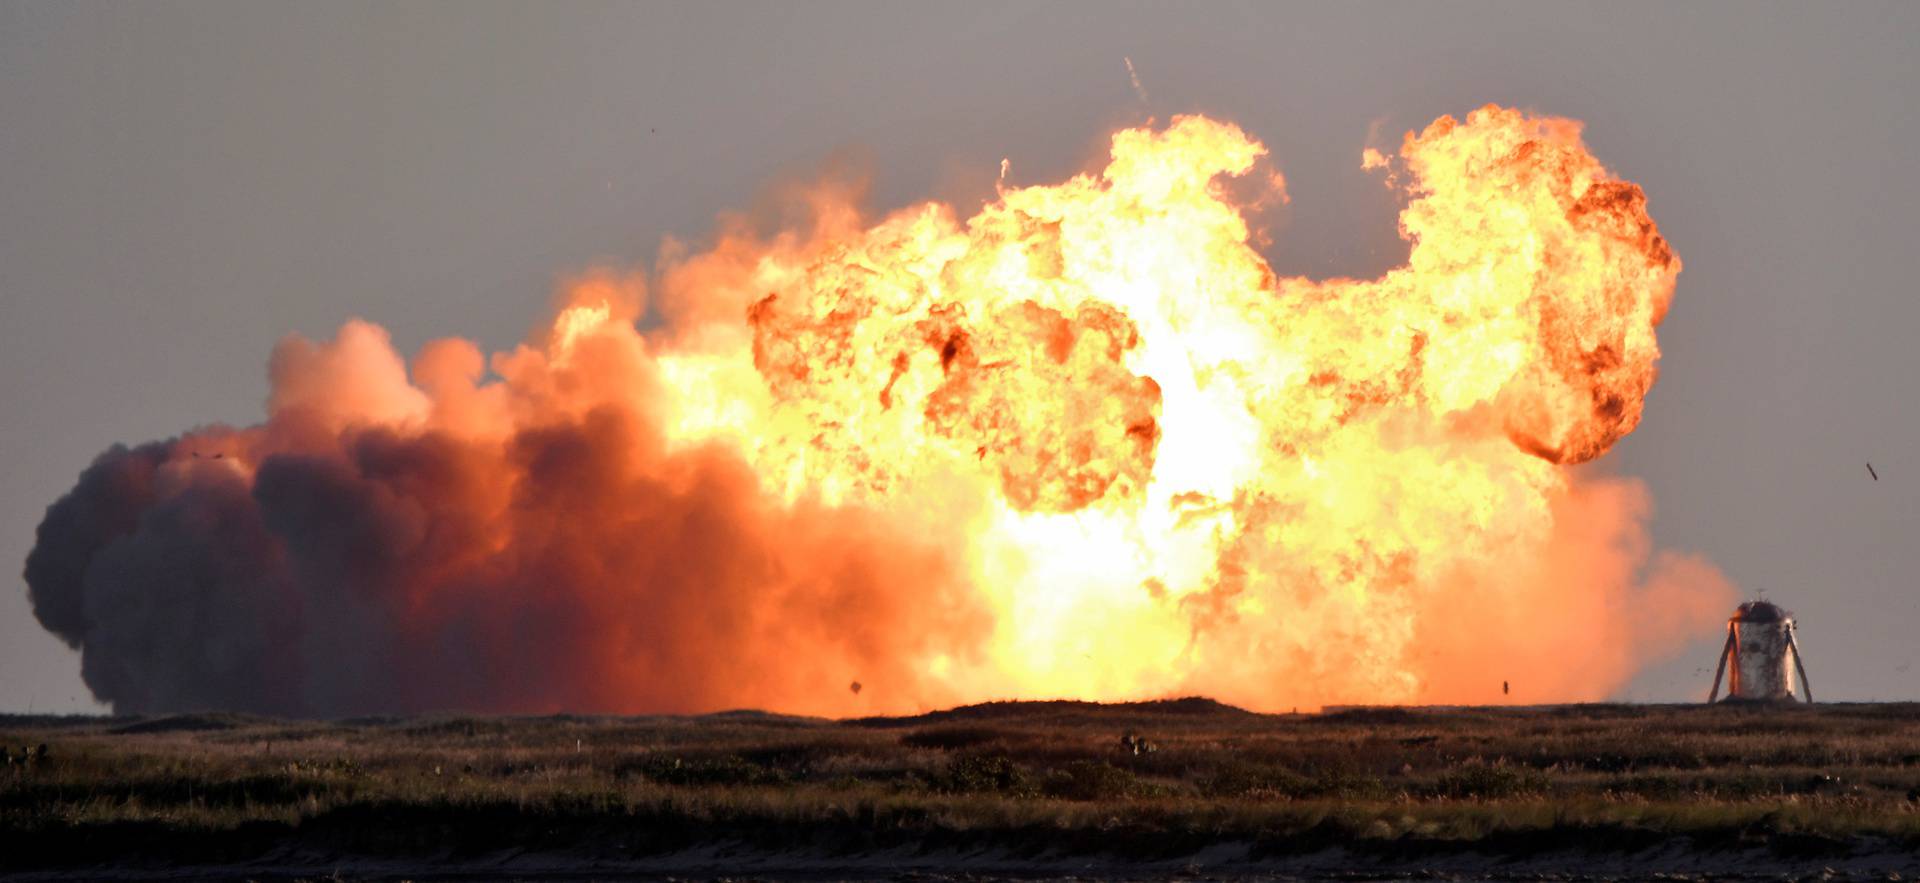 SpaceX's first super heavy-lift Starship SN8 rocket explodes during a return-landing attempt after it launched from their facility on a test flight in Boca Chica, Texas